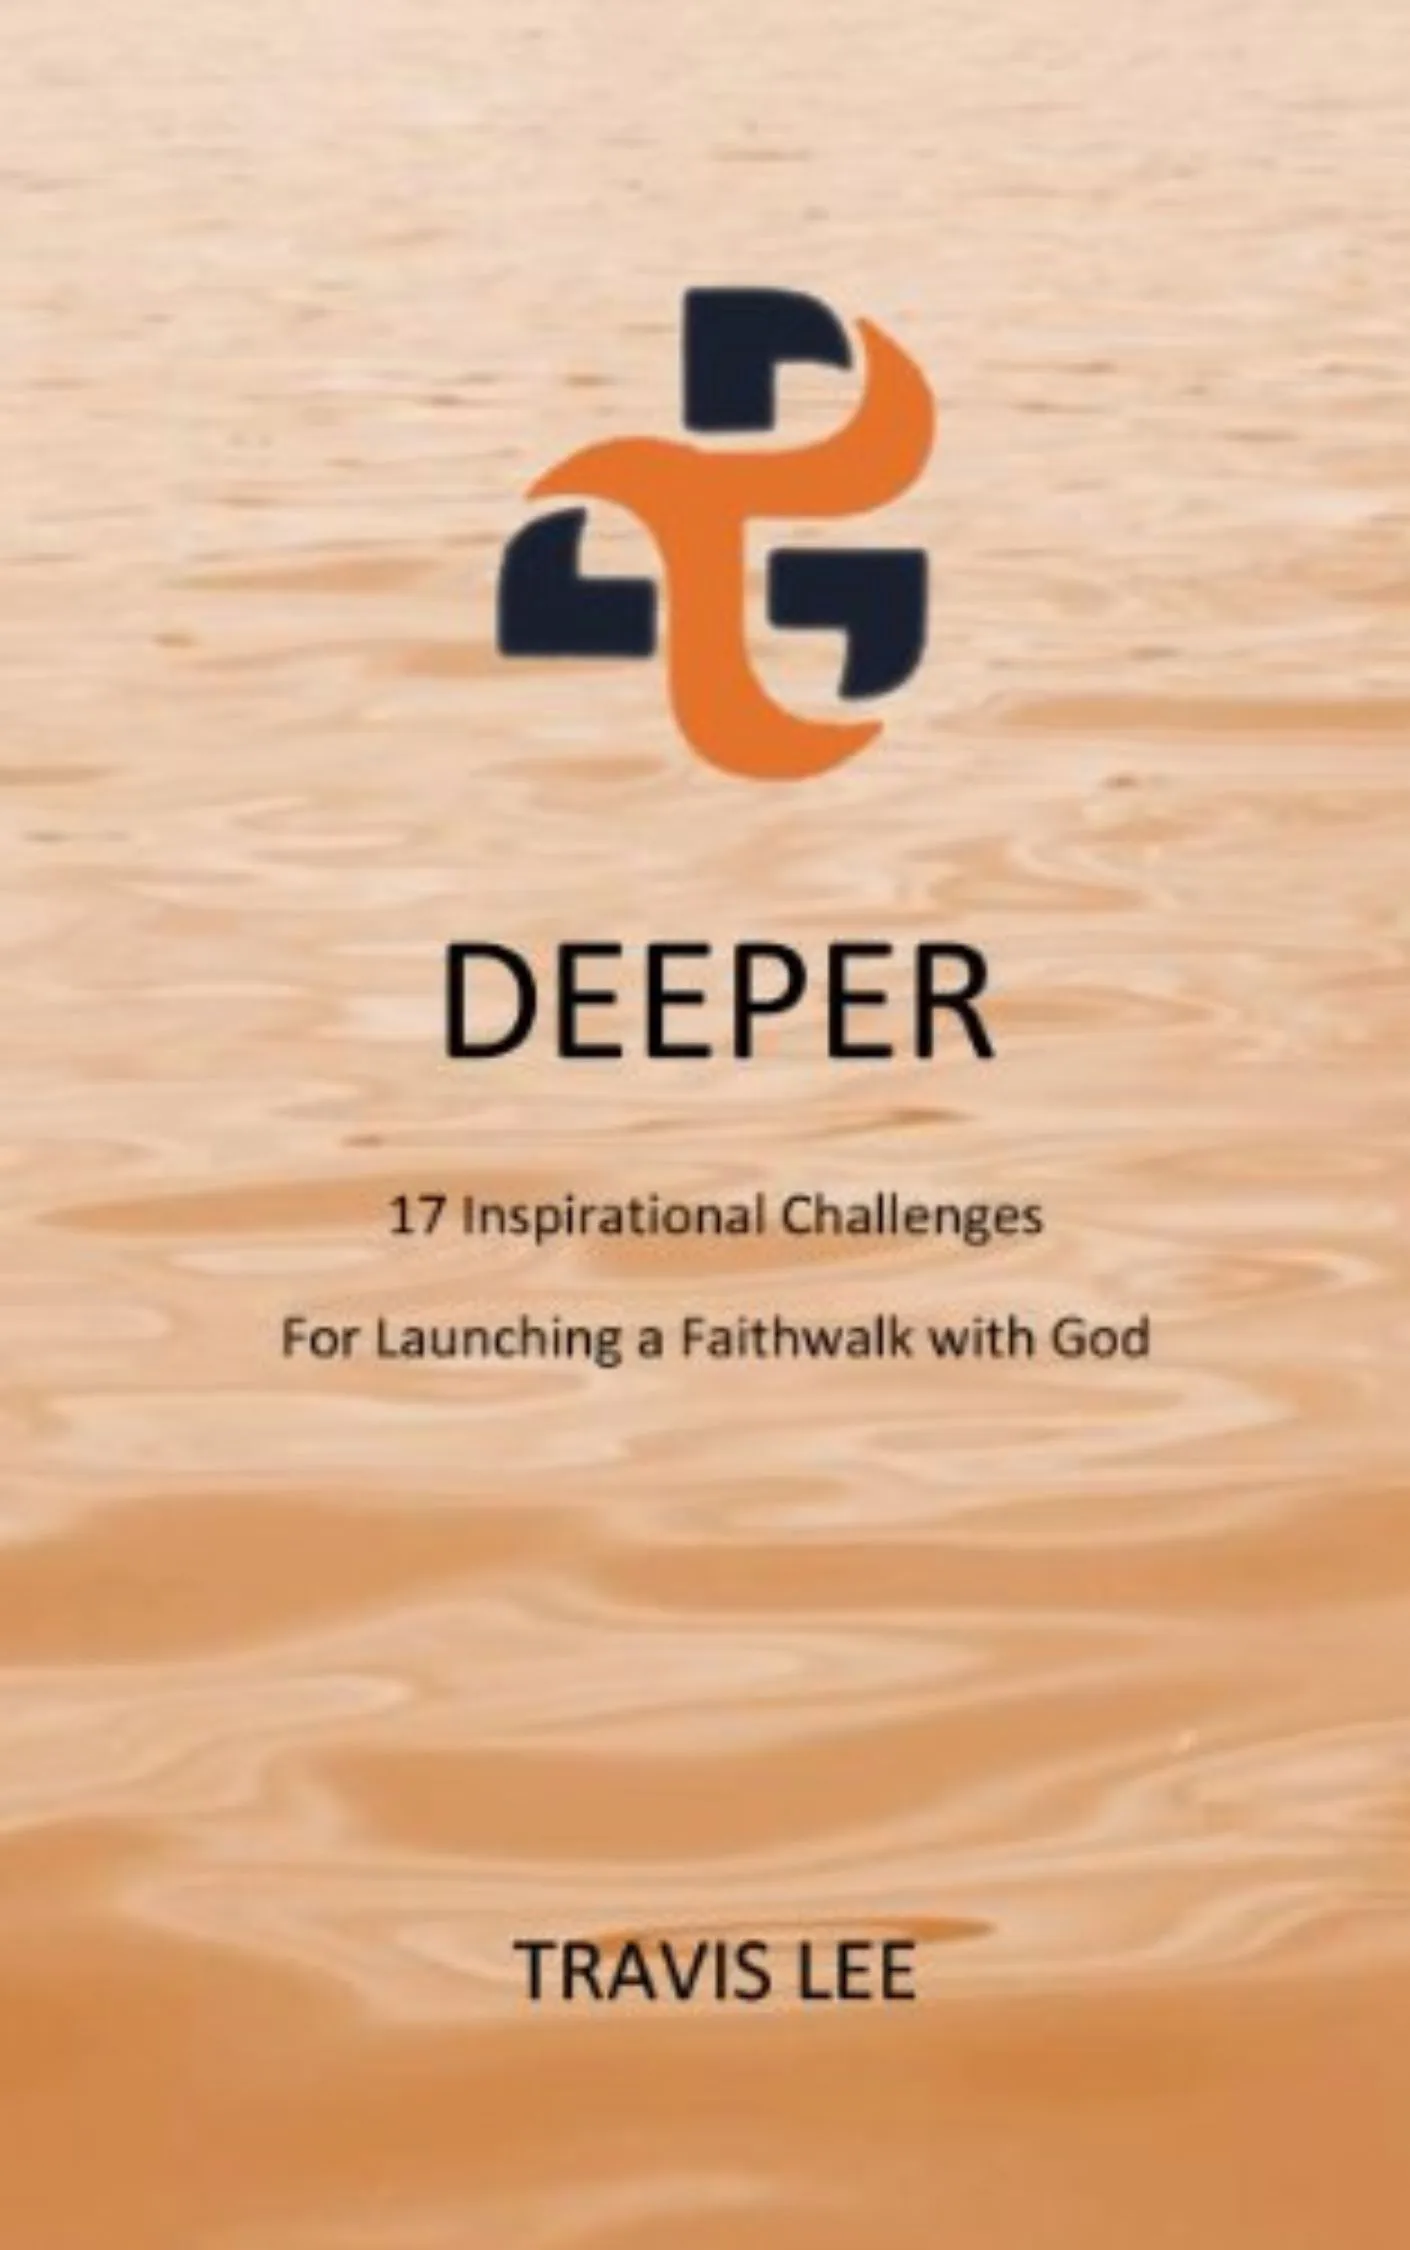 DEEPER: Launching a Faithwalk with God<br />
by: Travis Lee